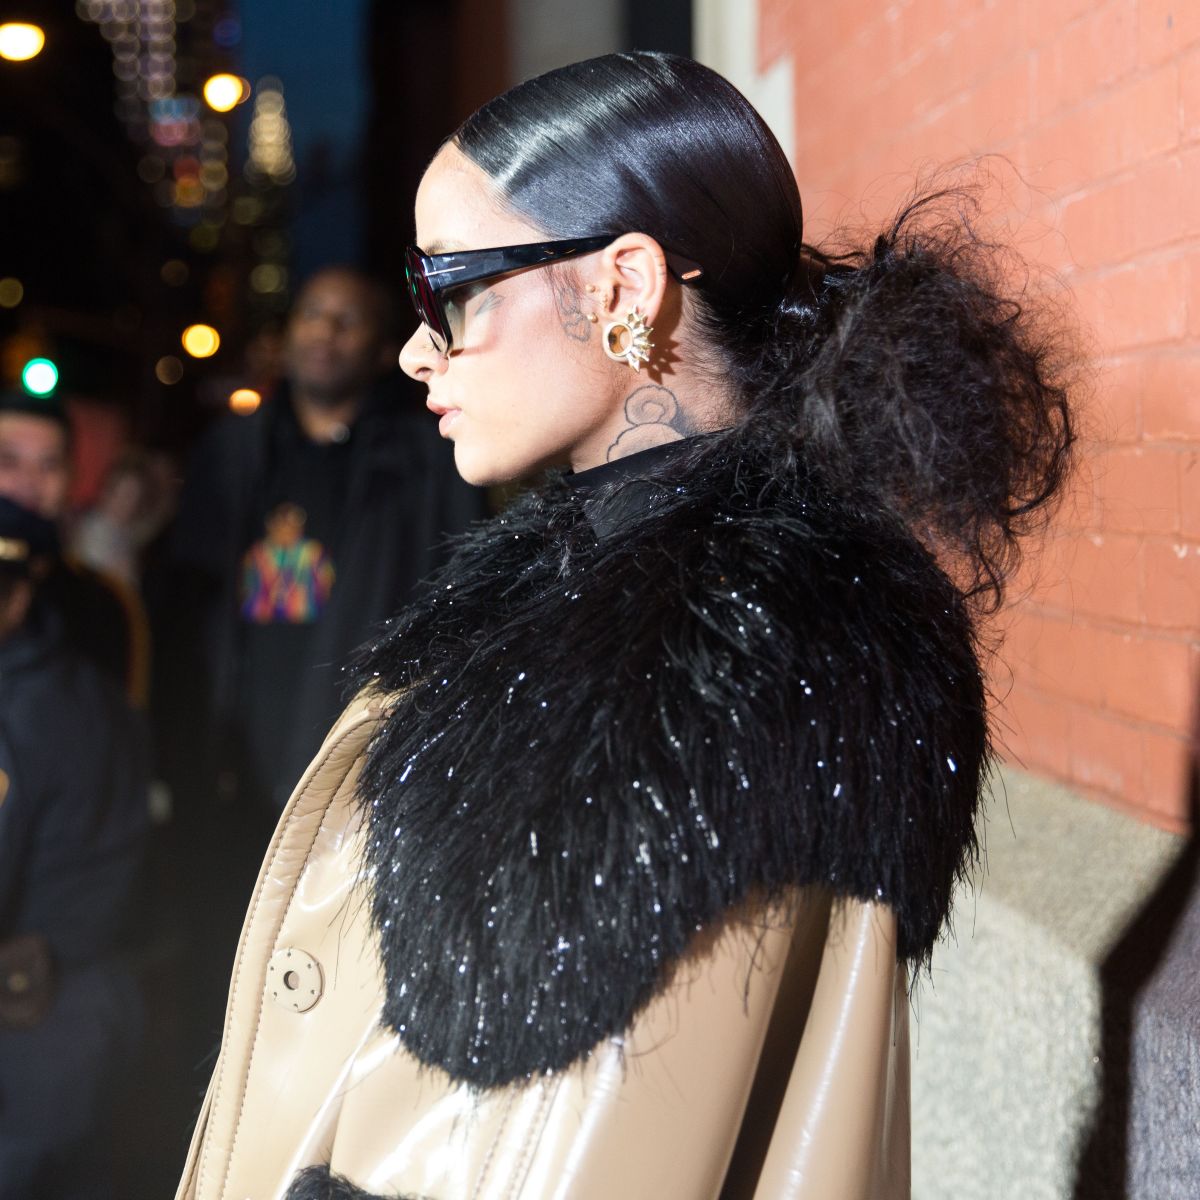 kehlani-at-marc-jacobs-fashion-show-at-nyfw-in-new-york-02-14-2018-4.jpg